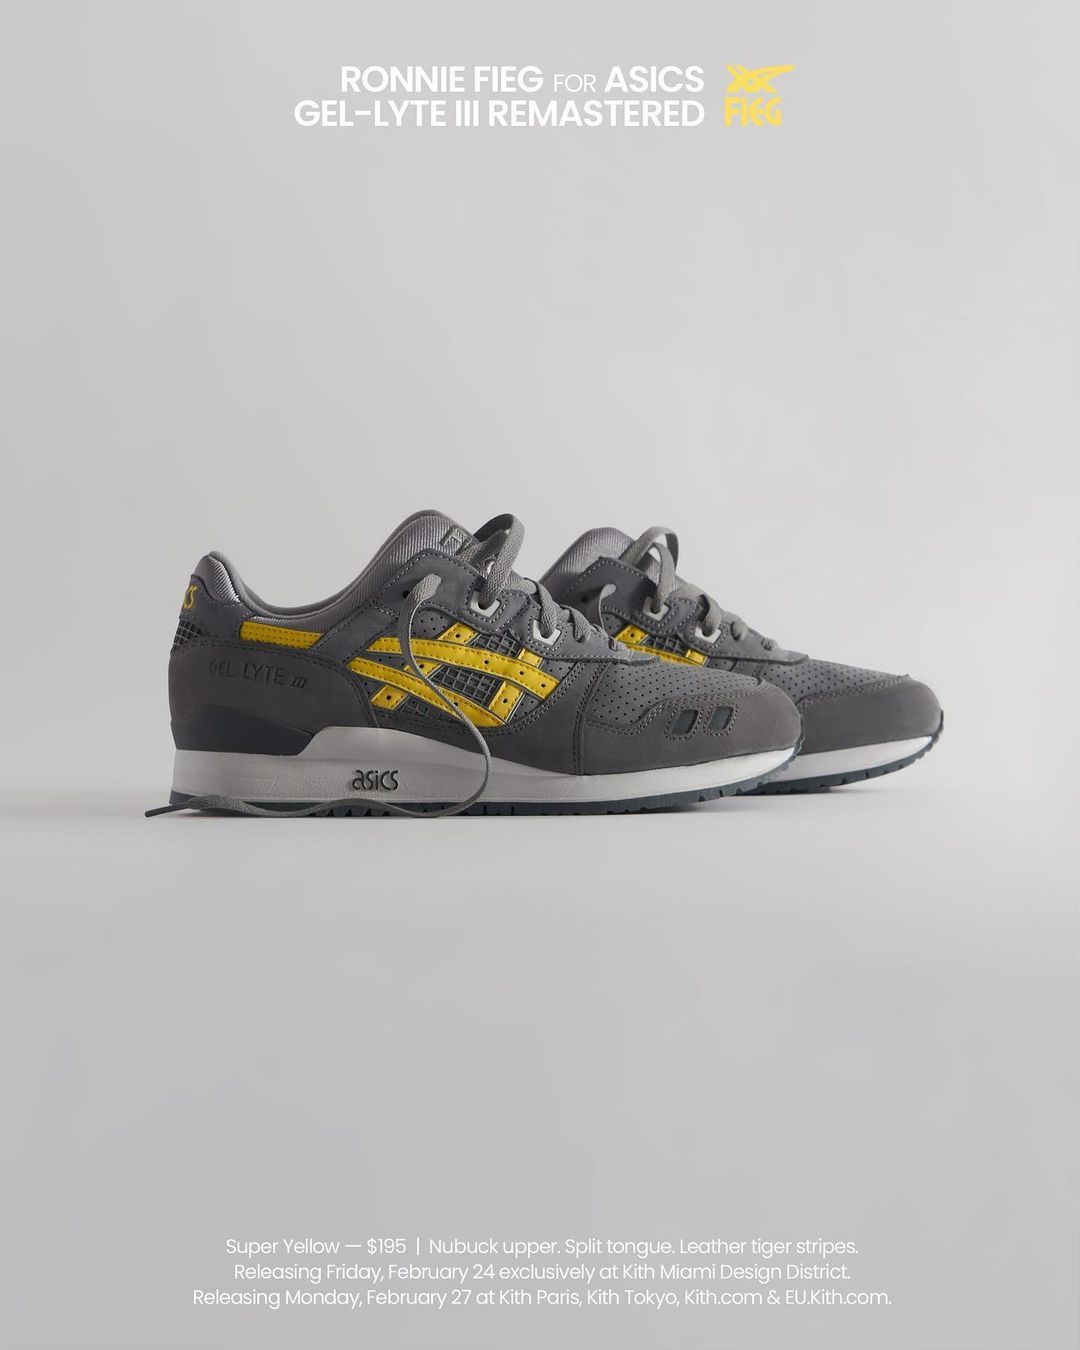 Kith Ronnie Fieg for ASICS GEL-LYTE III Remastered - Super Yellow